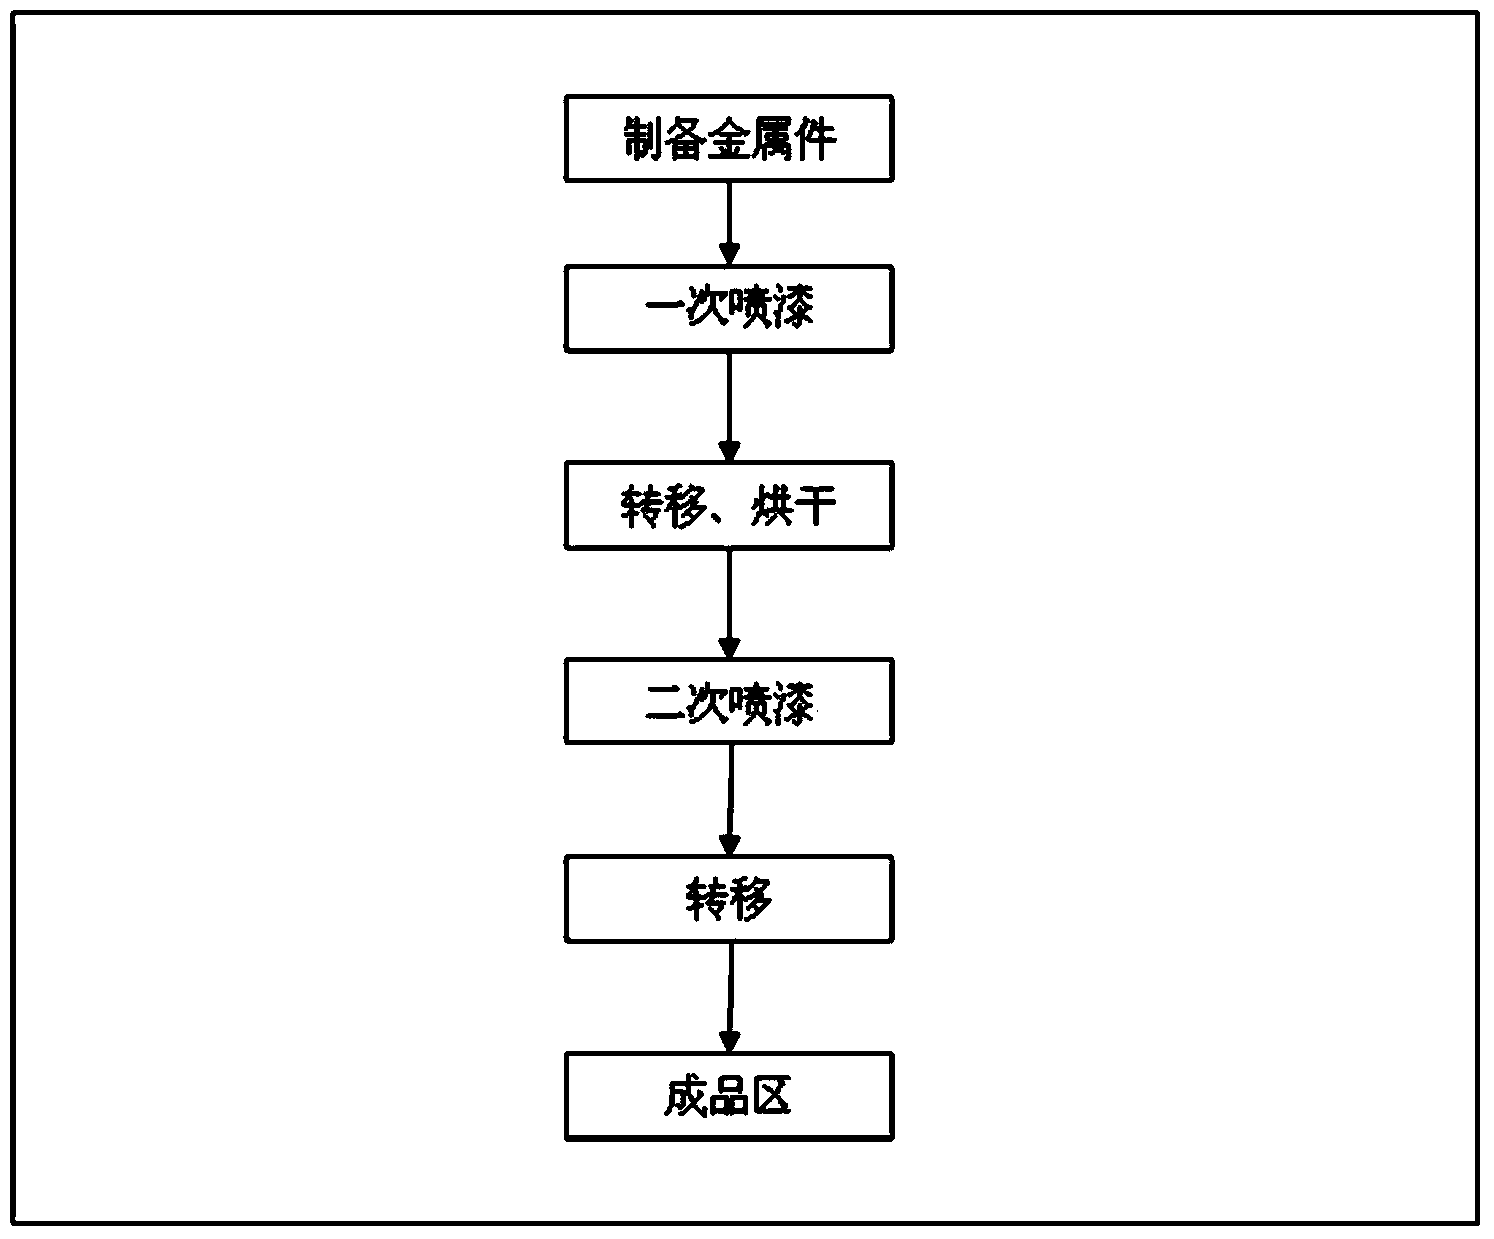 Multi-station multicolor hardware product spray coating method and equipment